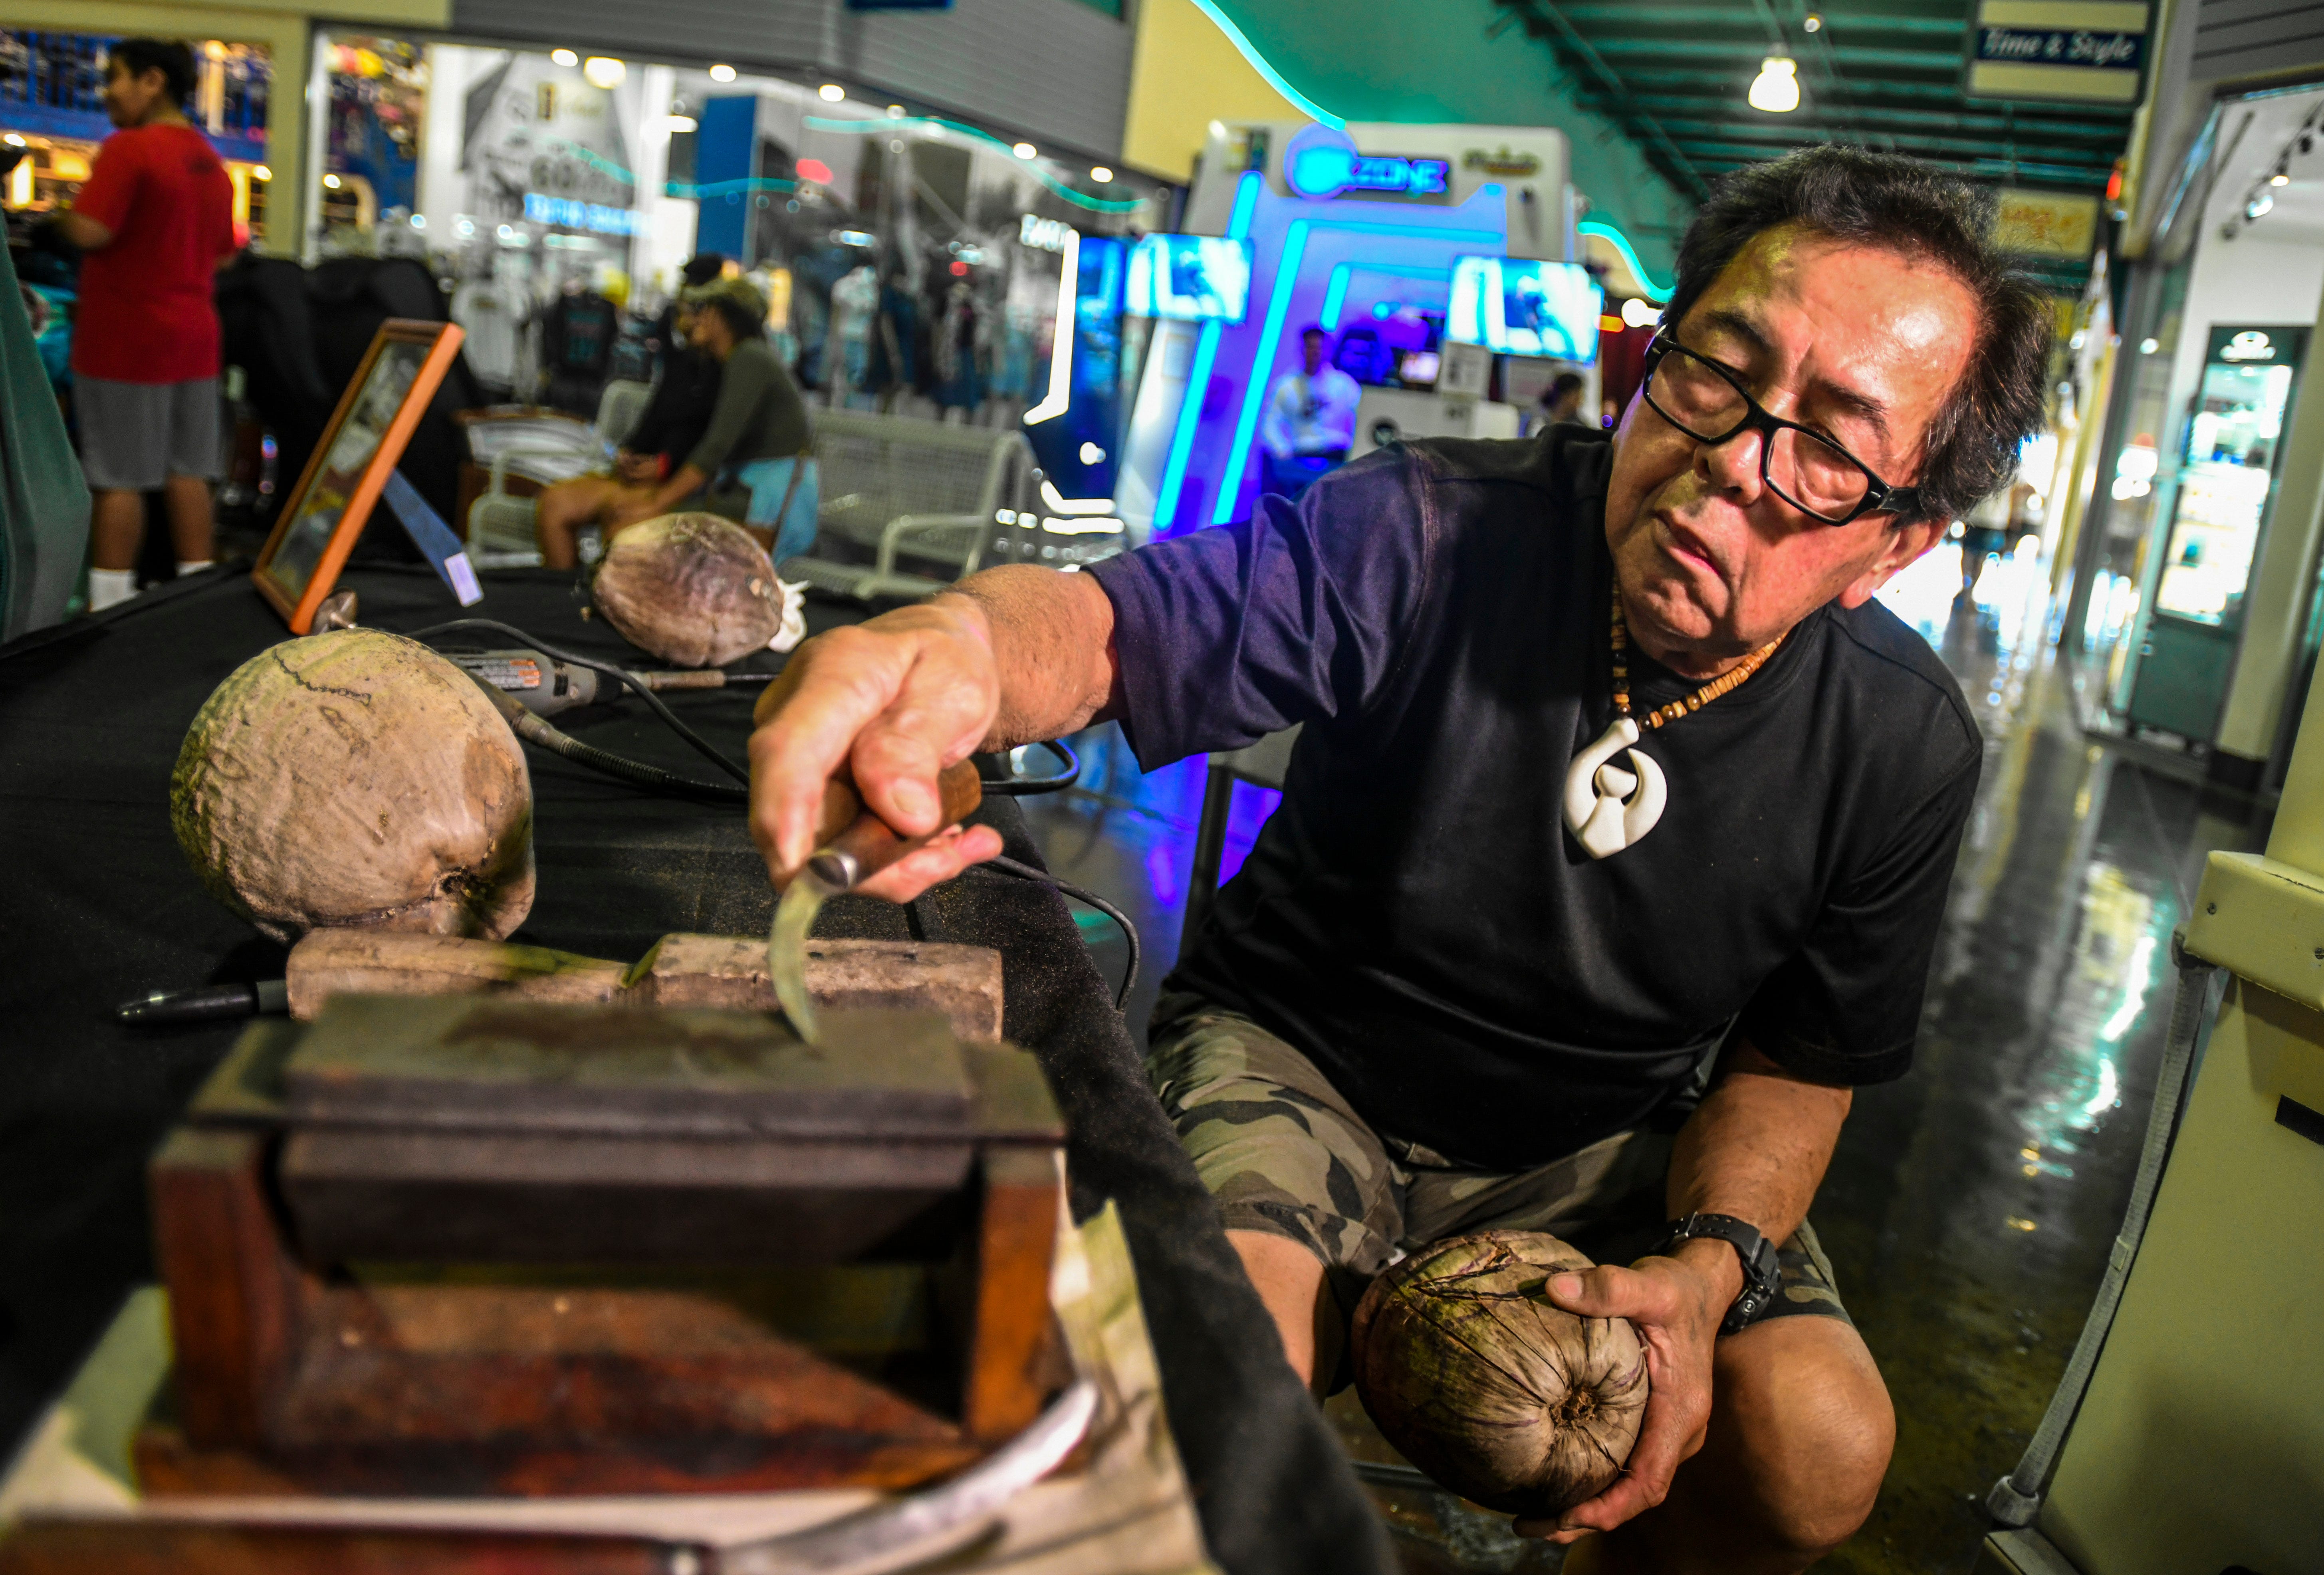 Master Carver Greg Pangelinan sharpens of of the many blades he uses in this March 30, 2019, file photo. Guam traditional and contemporary artists affected financially by the pandemic can apply for up to $5,000 in relief funds.